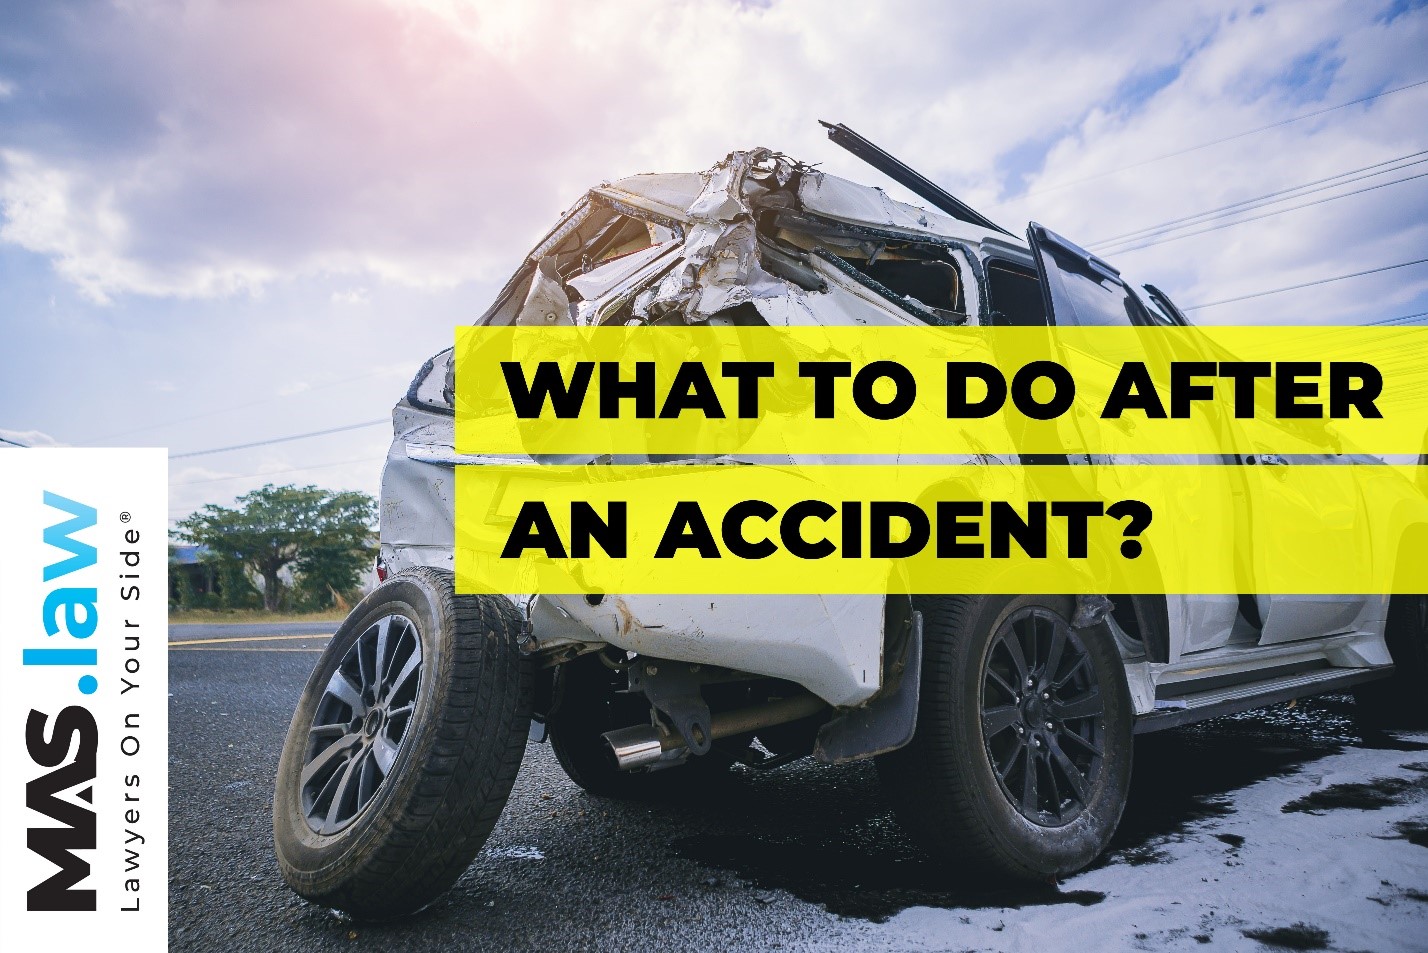 What To Do After an Accident